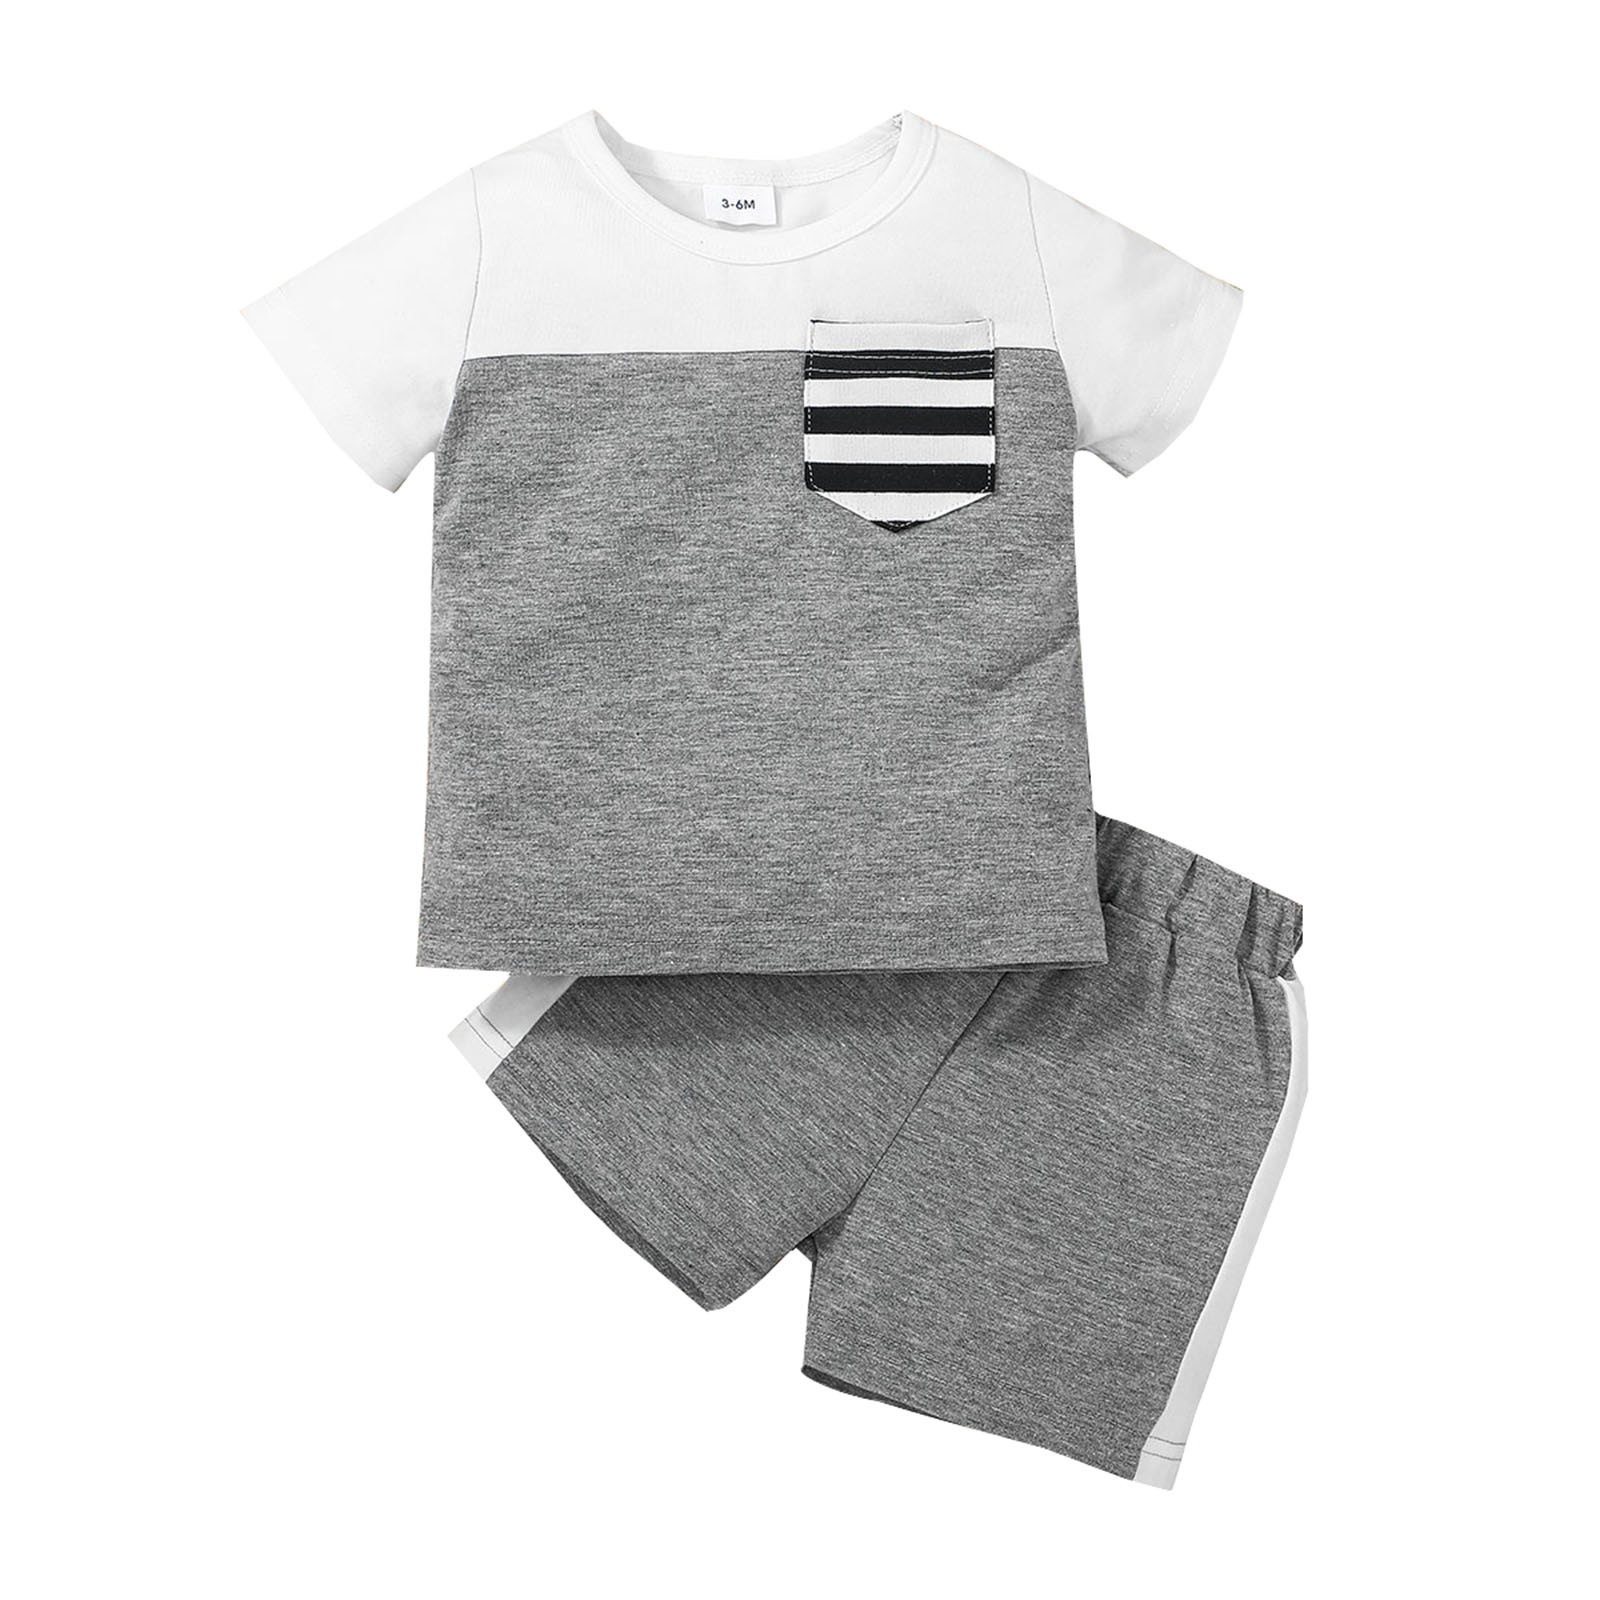 New Born Baby Girl Outfit Baby Clothes Girl Striped T-shirt Boys Sleeve Outfits 3M-24M Baby Sports Girls Short Tops Printed Shorts Girls Outfits&Set Girls Fashion Size 7 8 - image 1 of 9